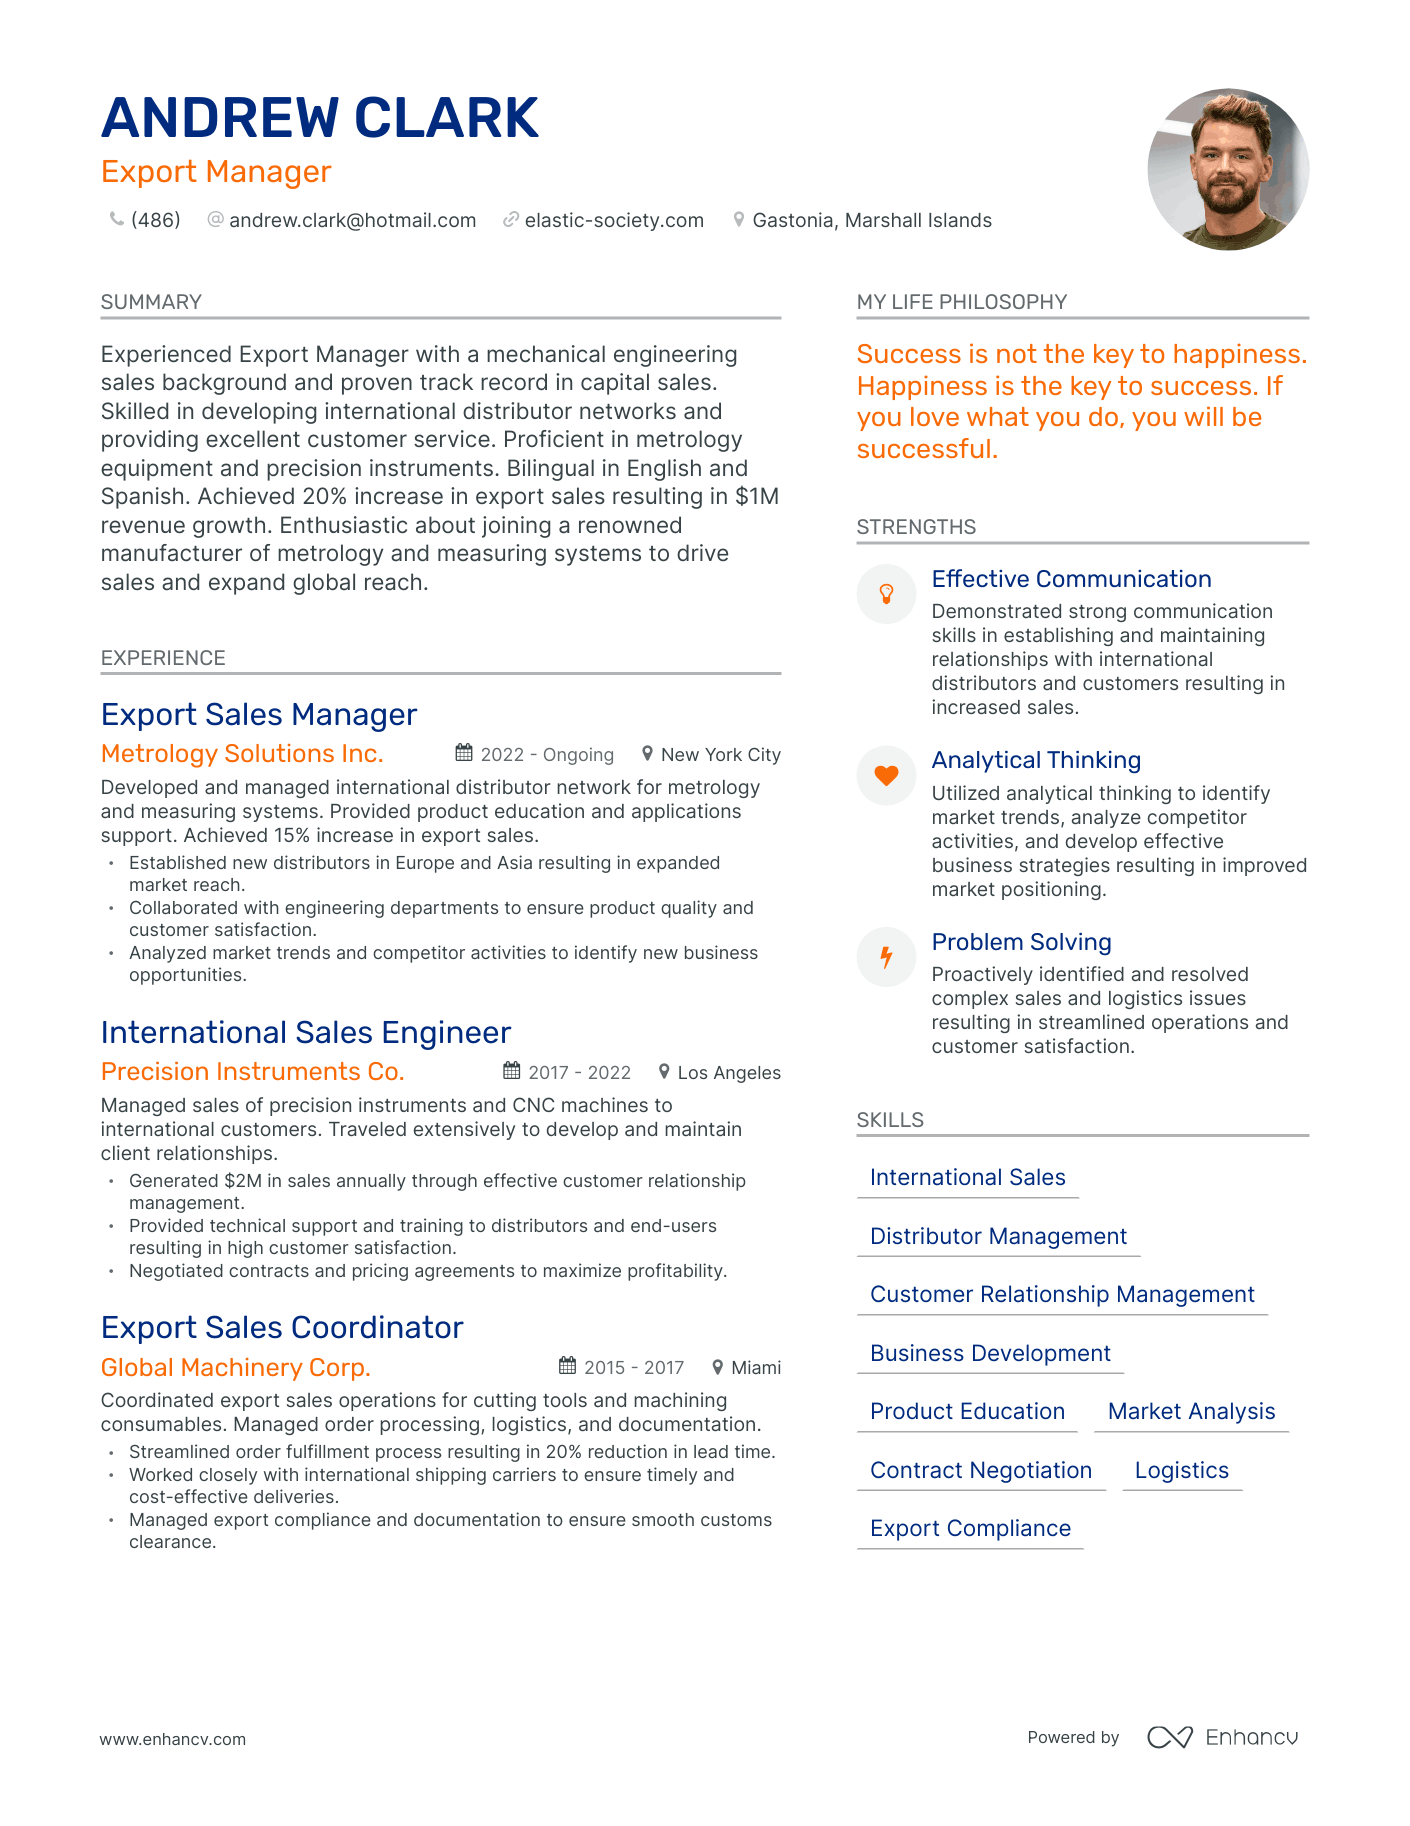 Export Manager resume example